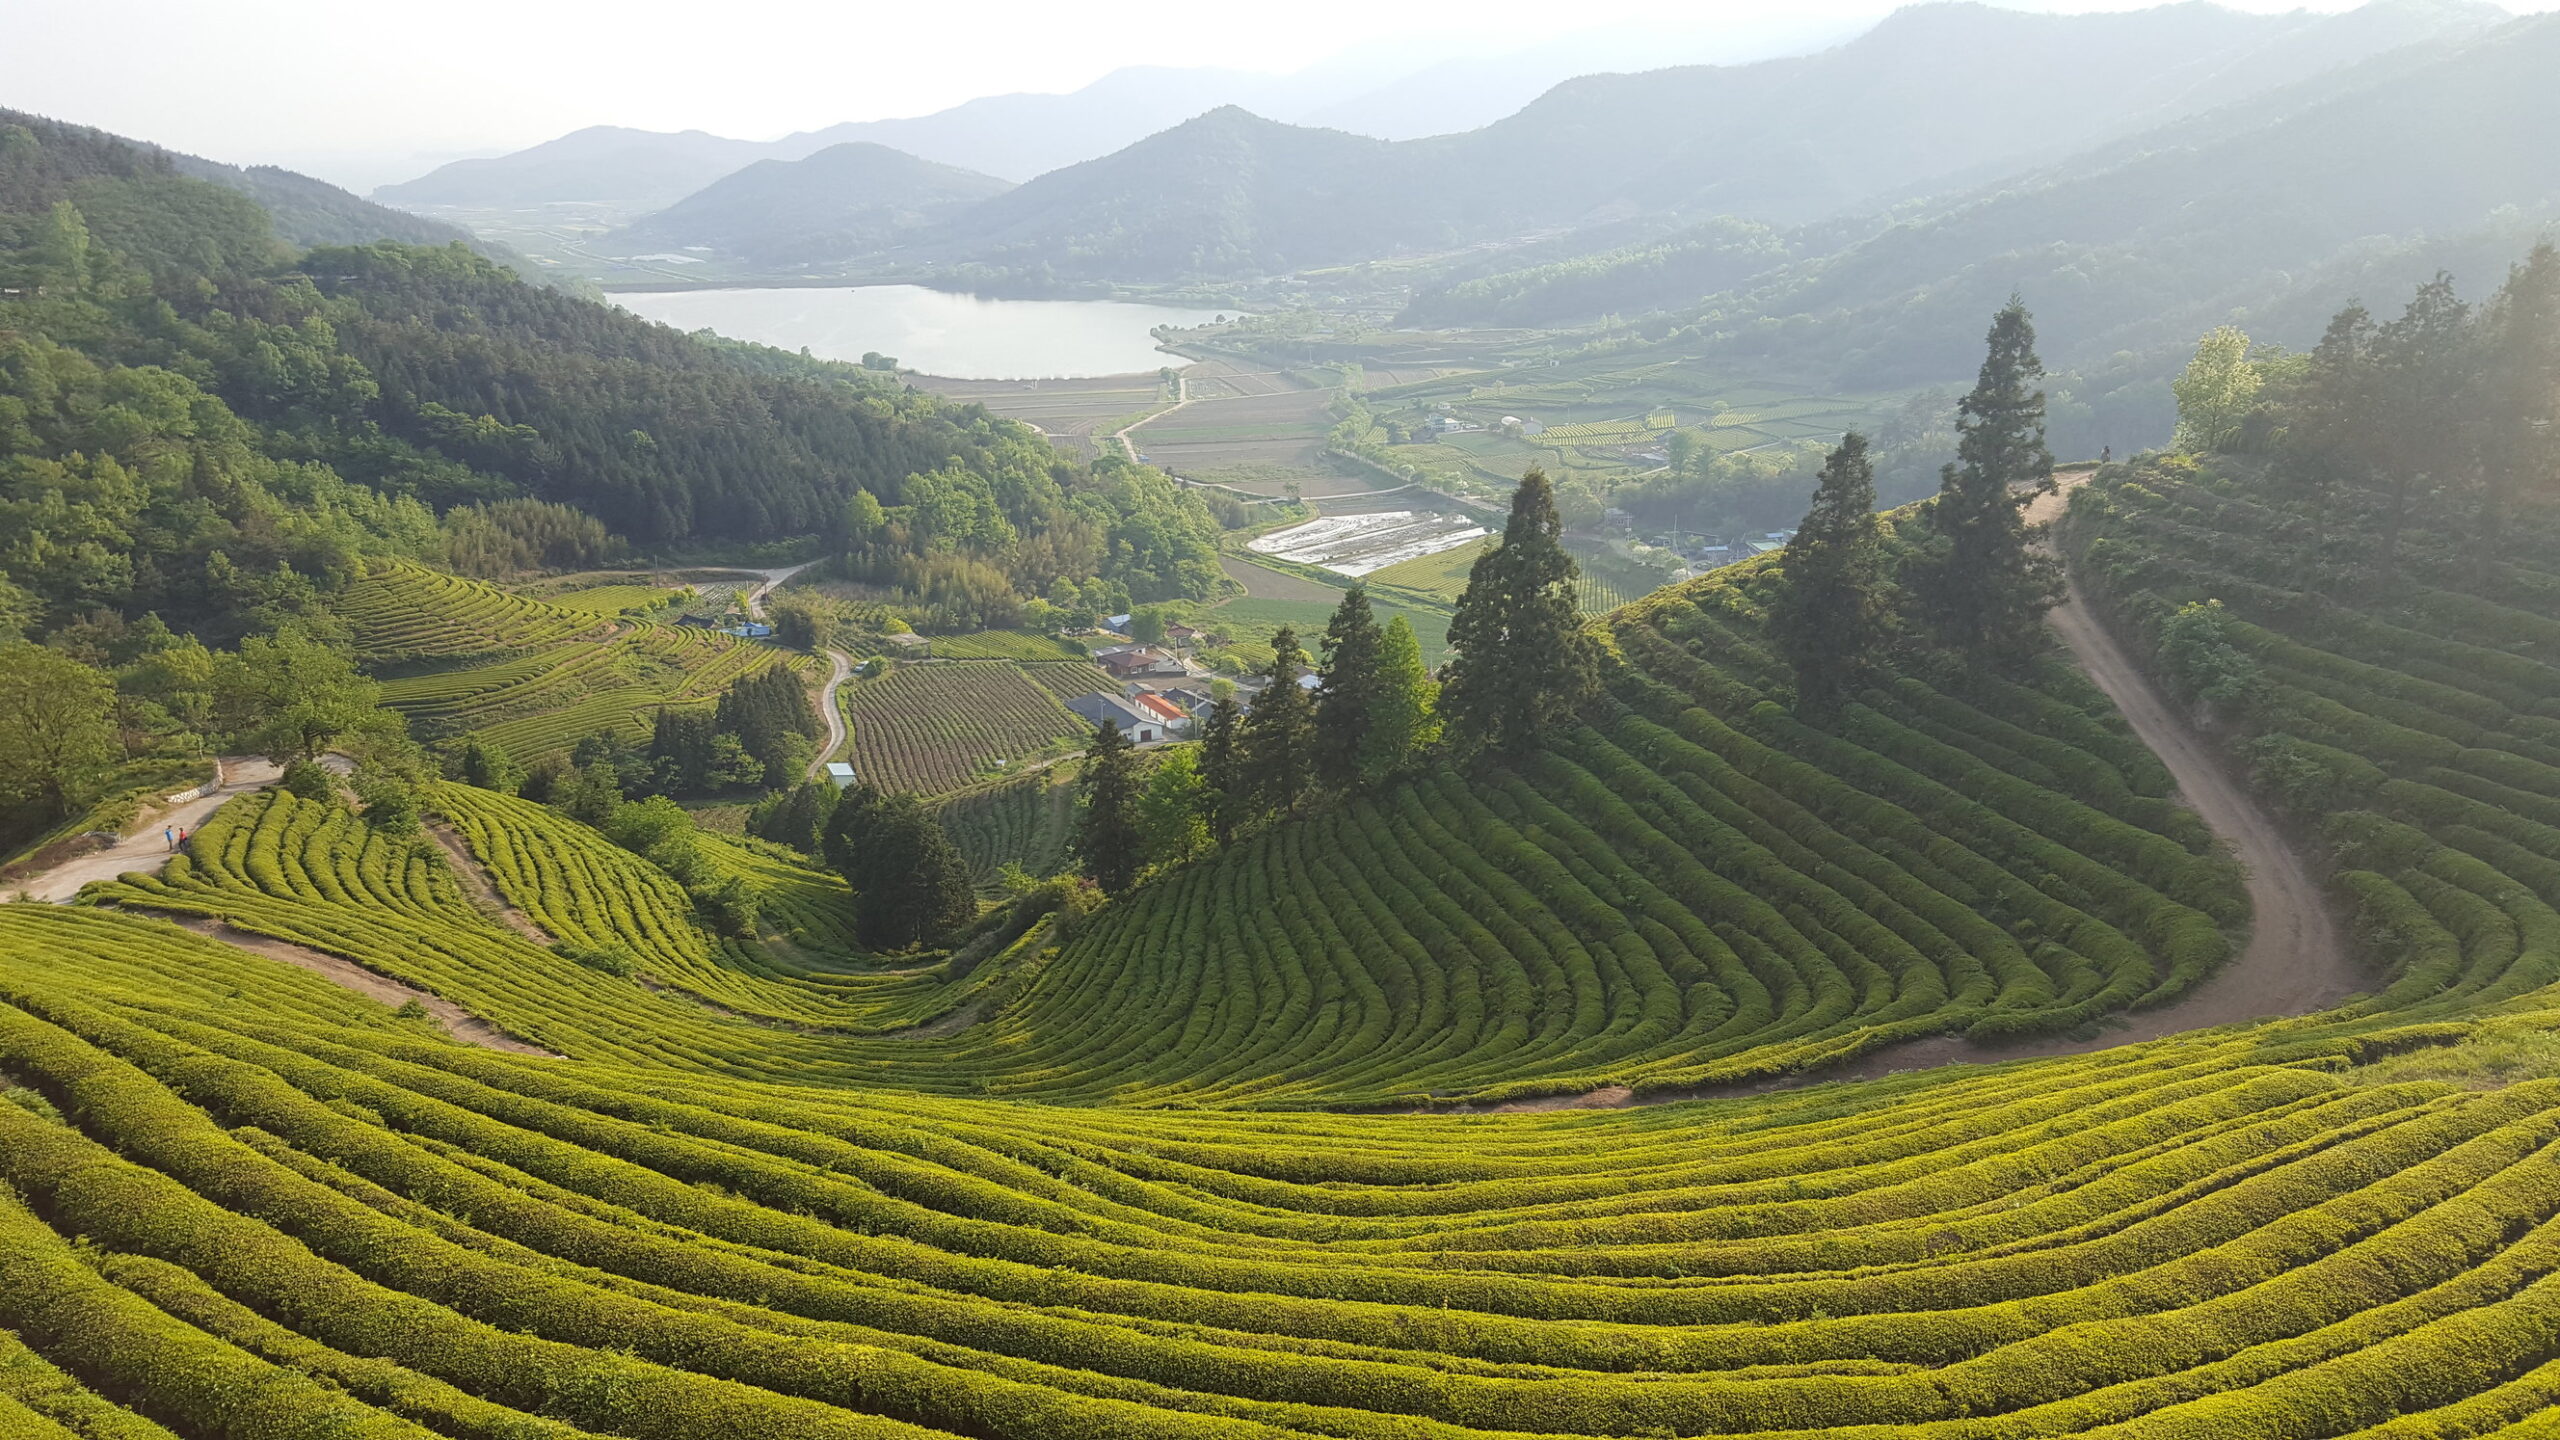 Stunning Pictures of South Korea’s Tea Plantations